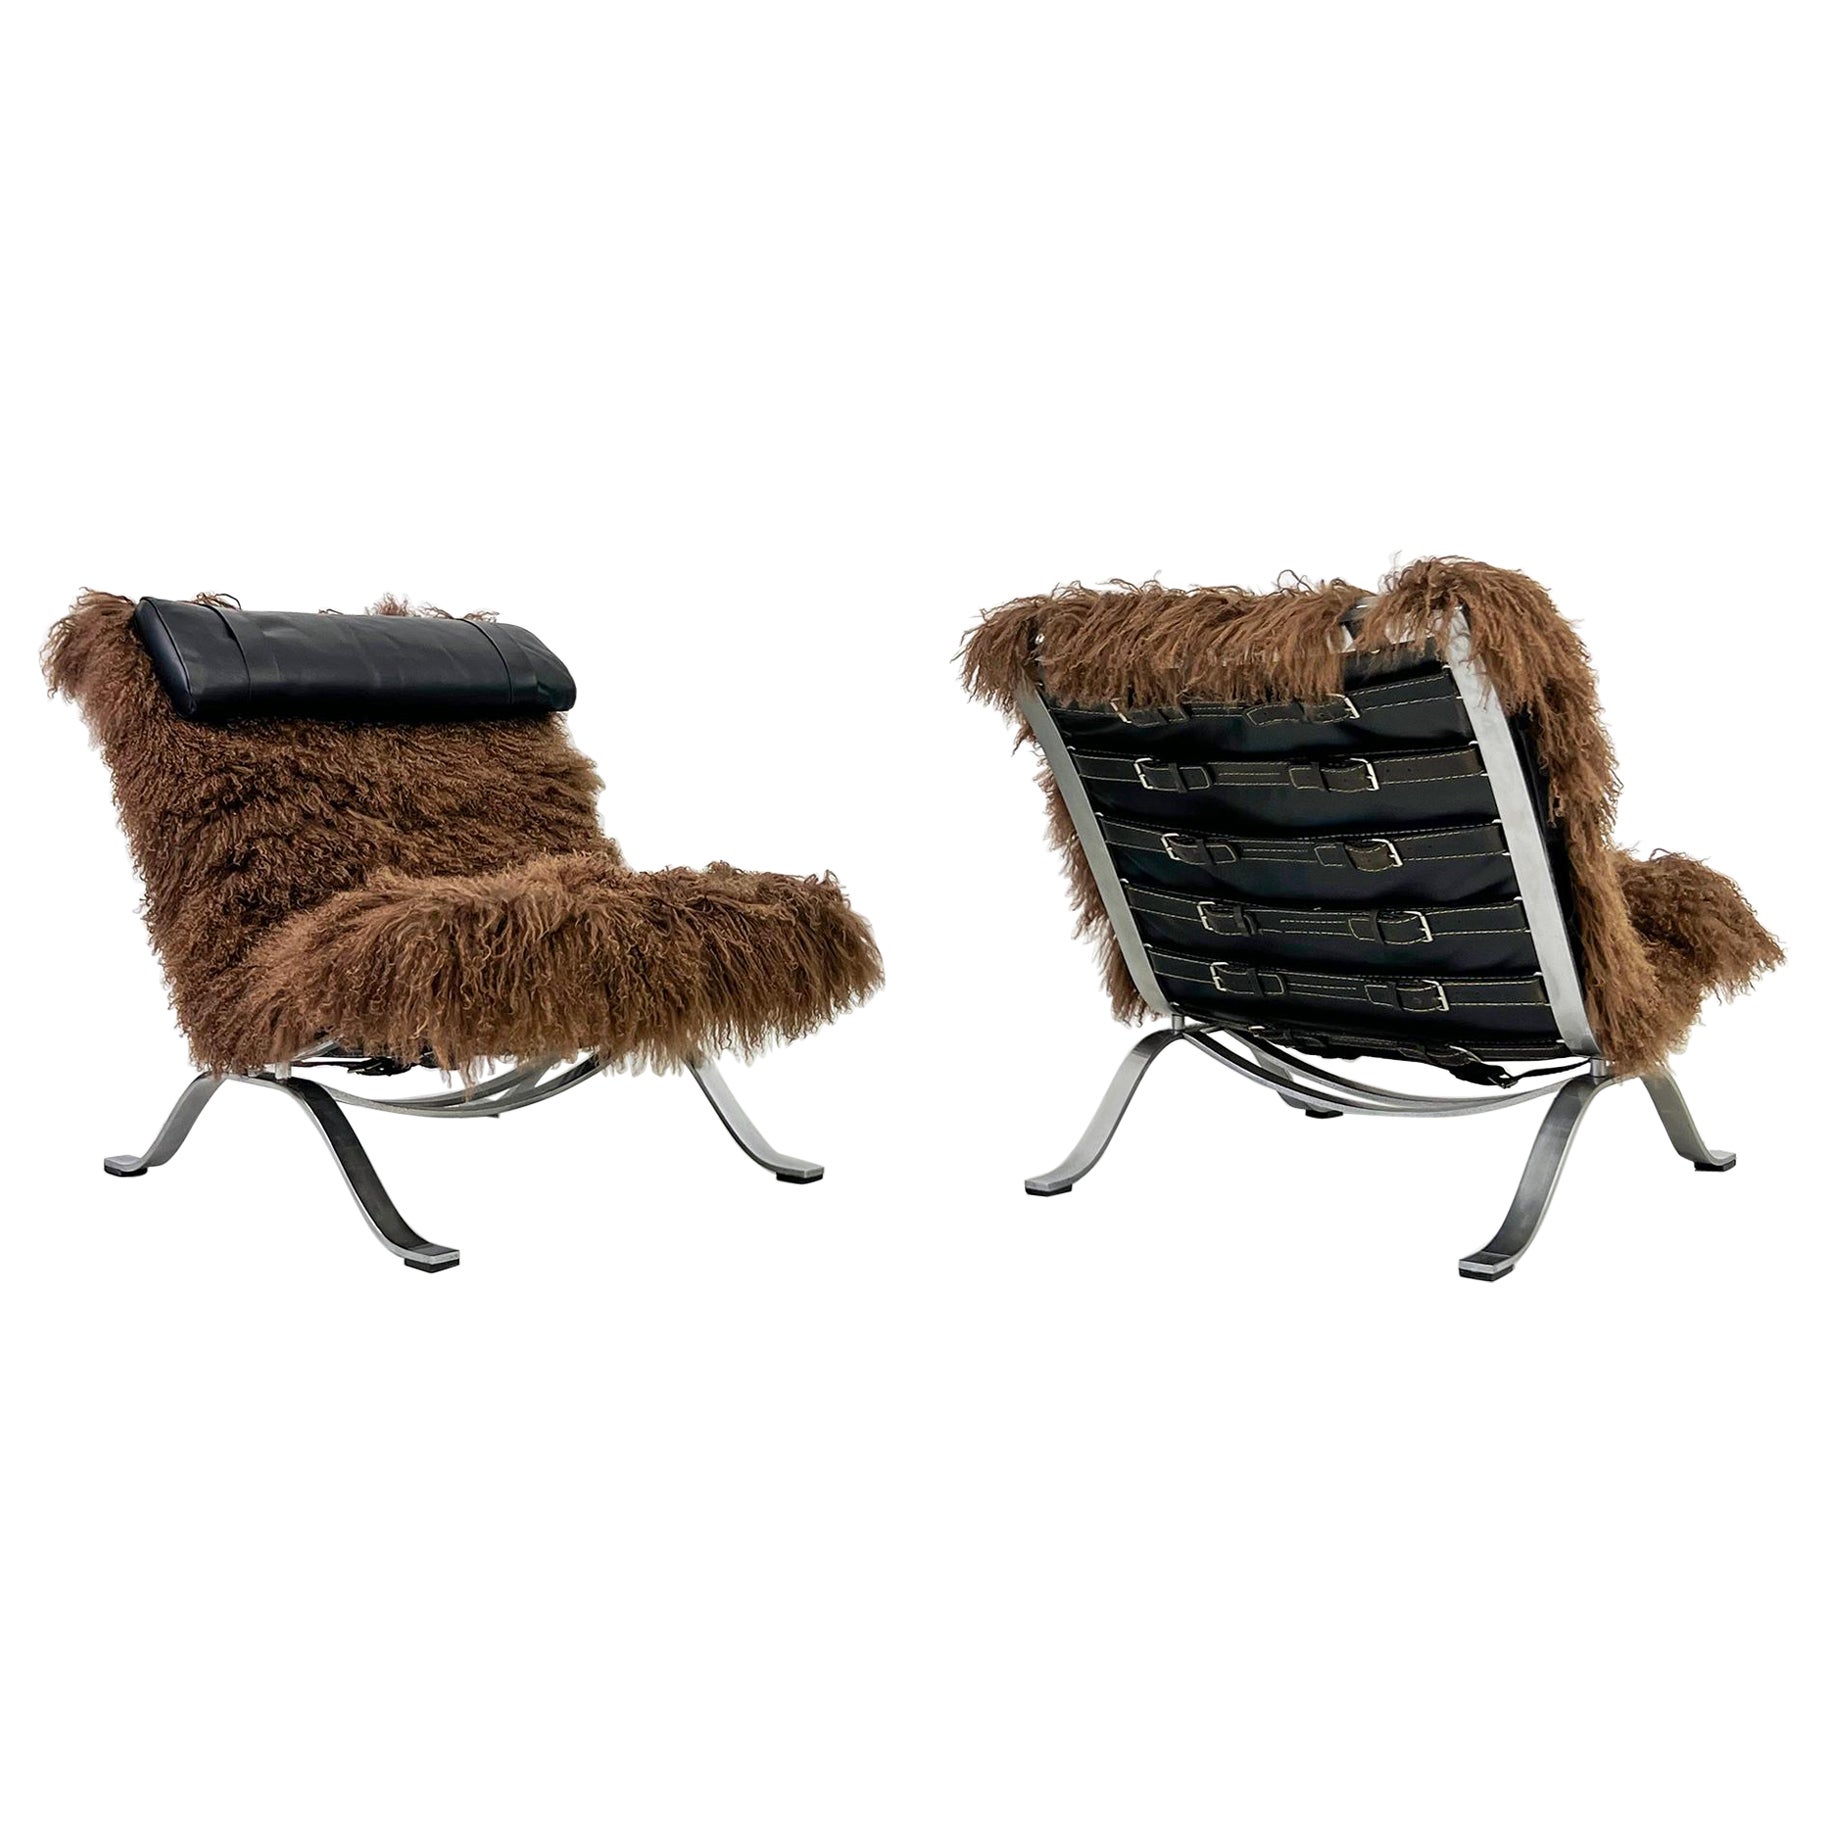 Arne Norell Ari Chairs in Mongolian Sheepskin and Leather, A Pair